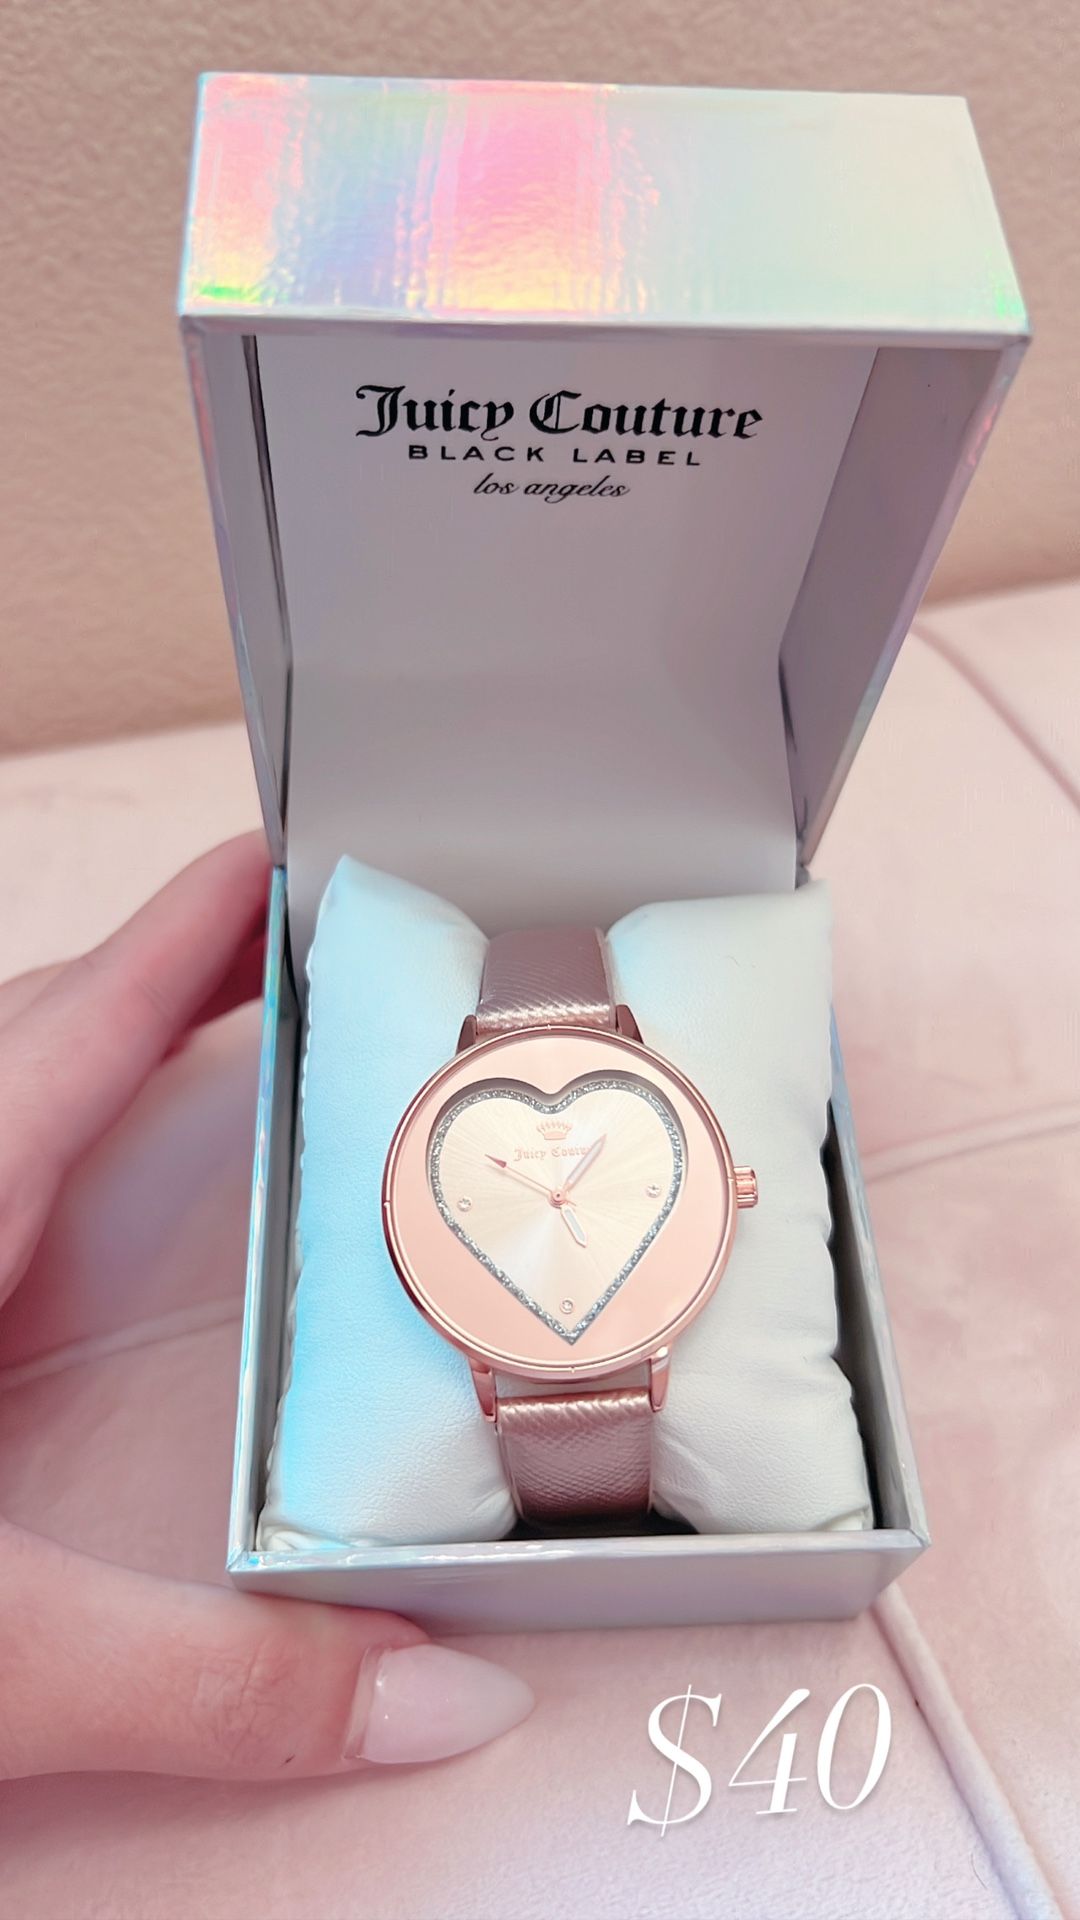 Juicy Couture Watches 